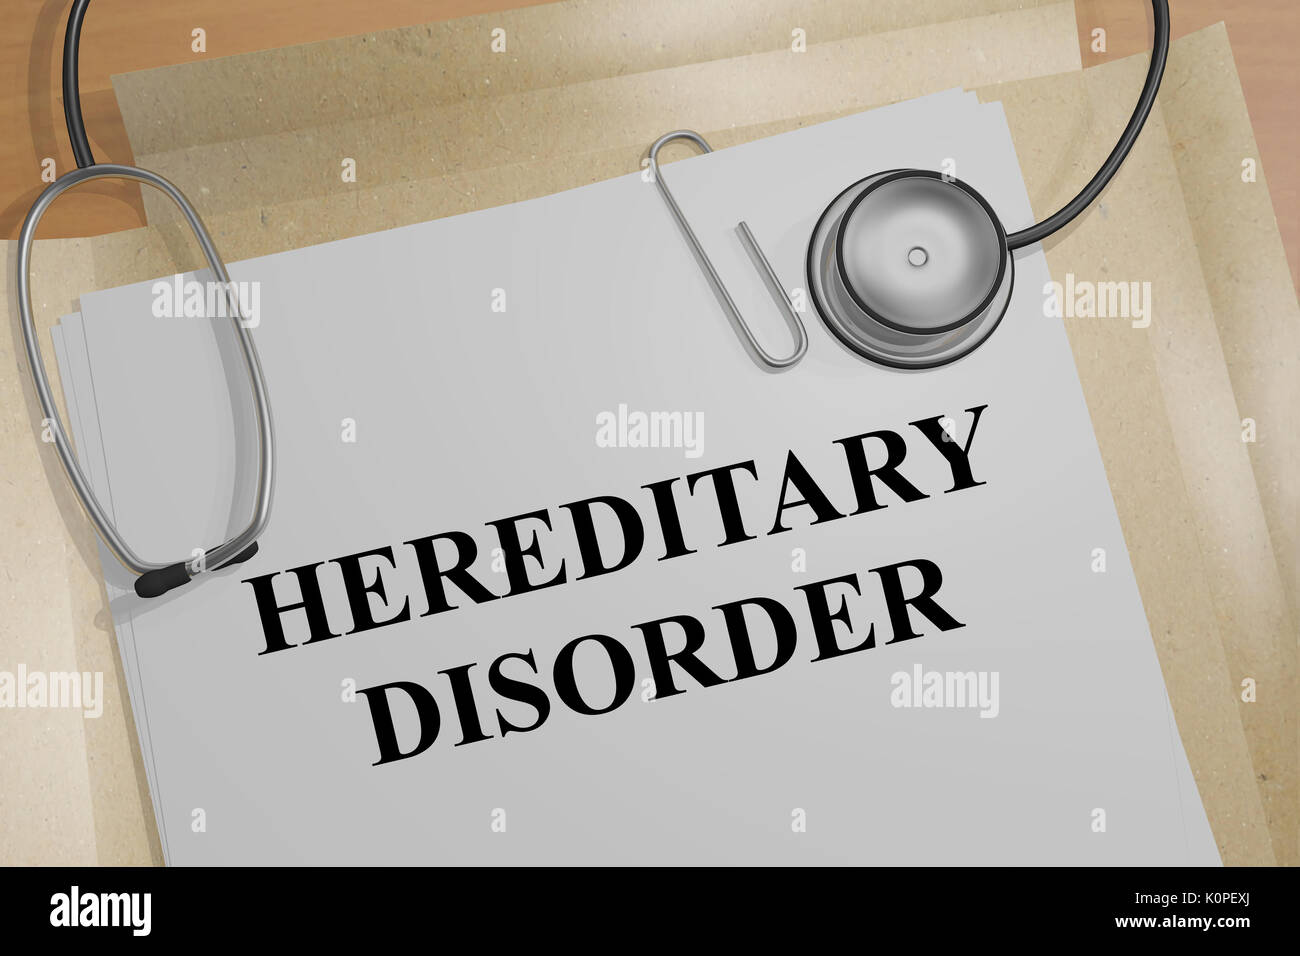 3D illustration of 'HEREDITARY DISORDER' title on a medical document Stock Photo